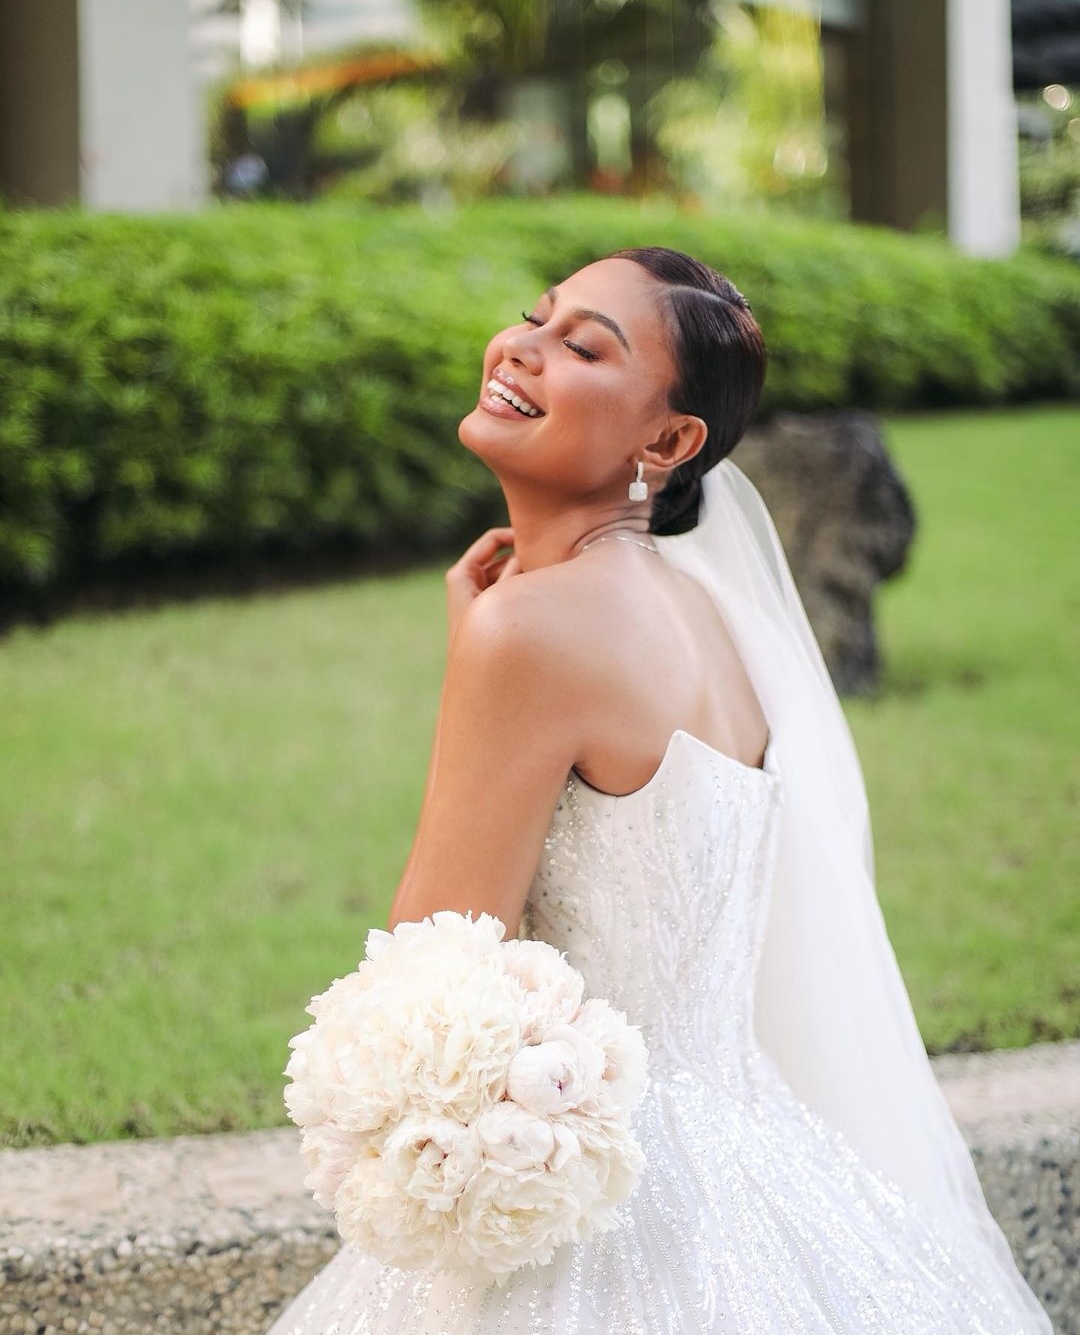 19 must-see wedding photos of Coleen Garcia and Billy Crawford in Balesin |  GMA Entertainment